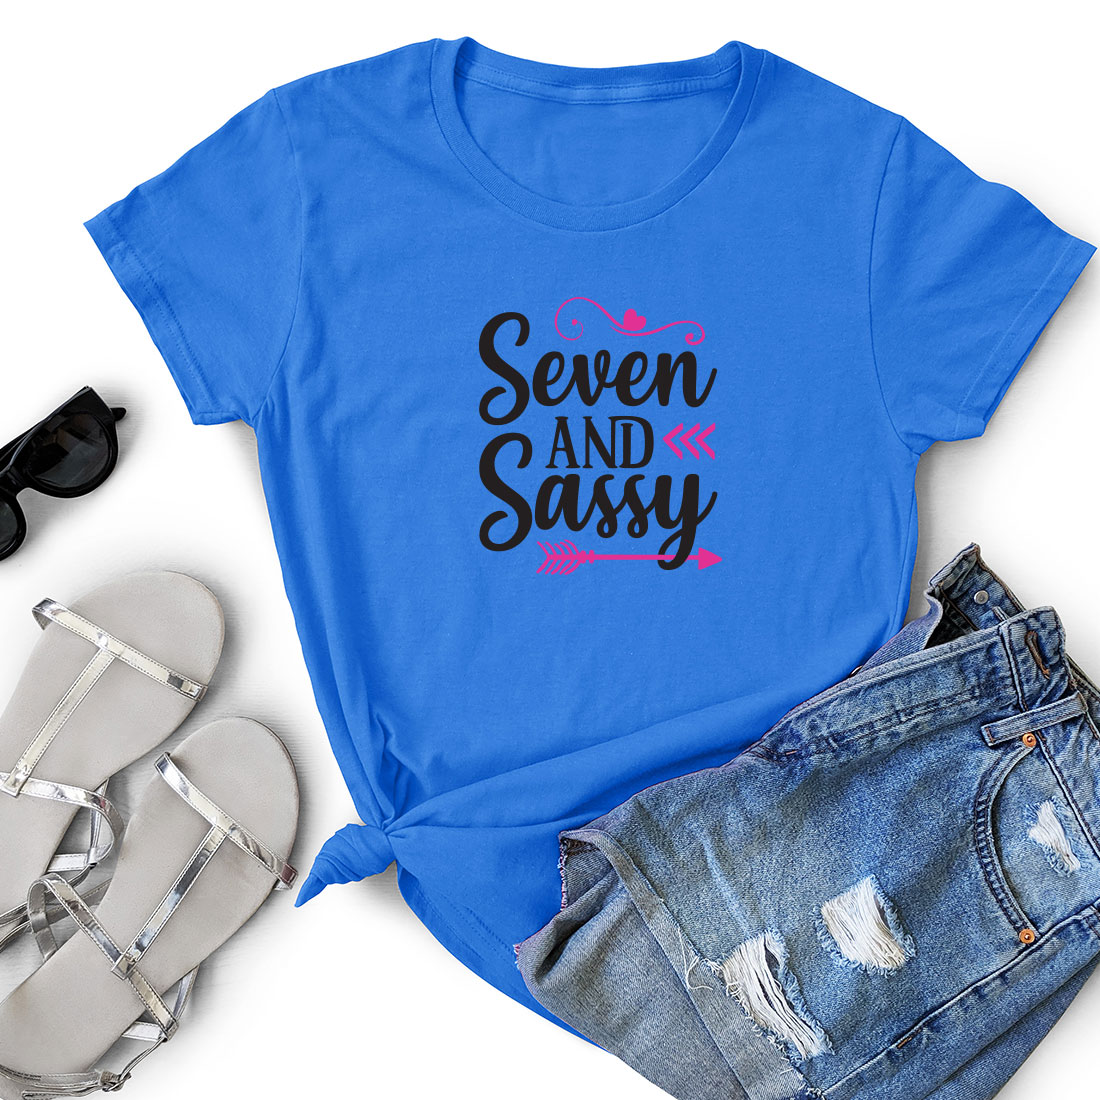 T - shirt that says seven and sassy next to a pair of shorts.